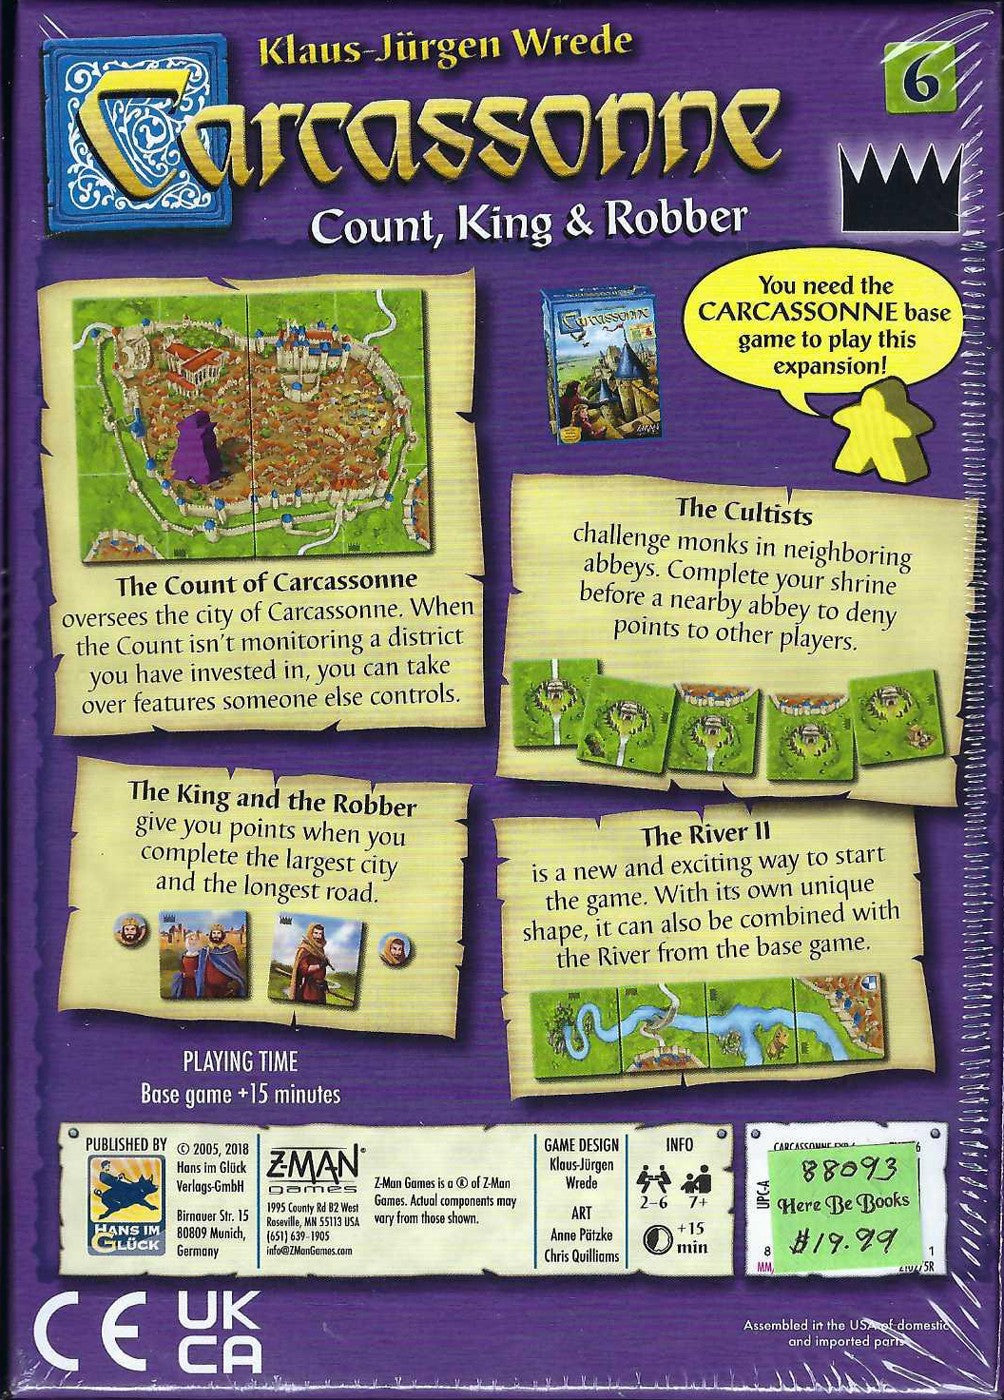 Carcassonne: Count, King & Robber (Expansion 6) back of box